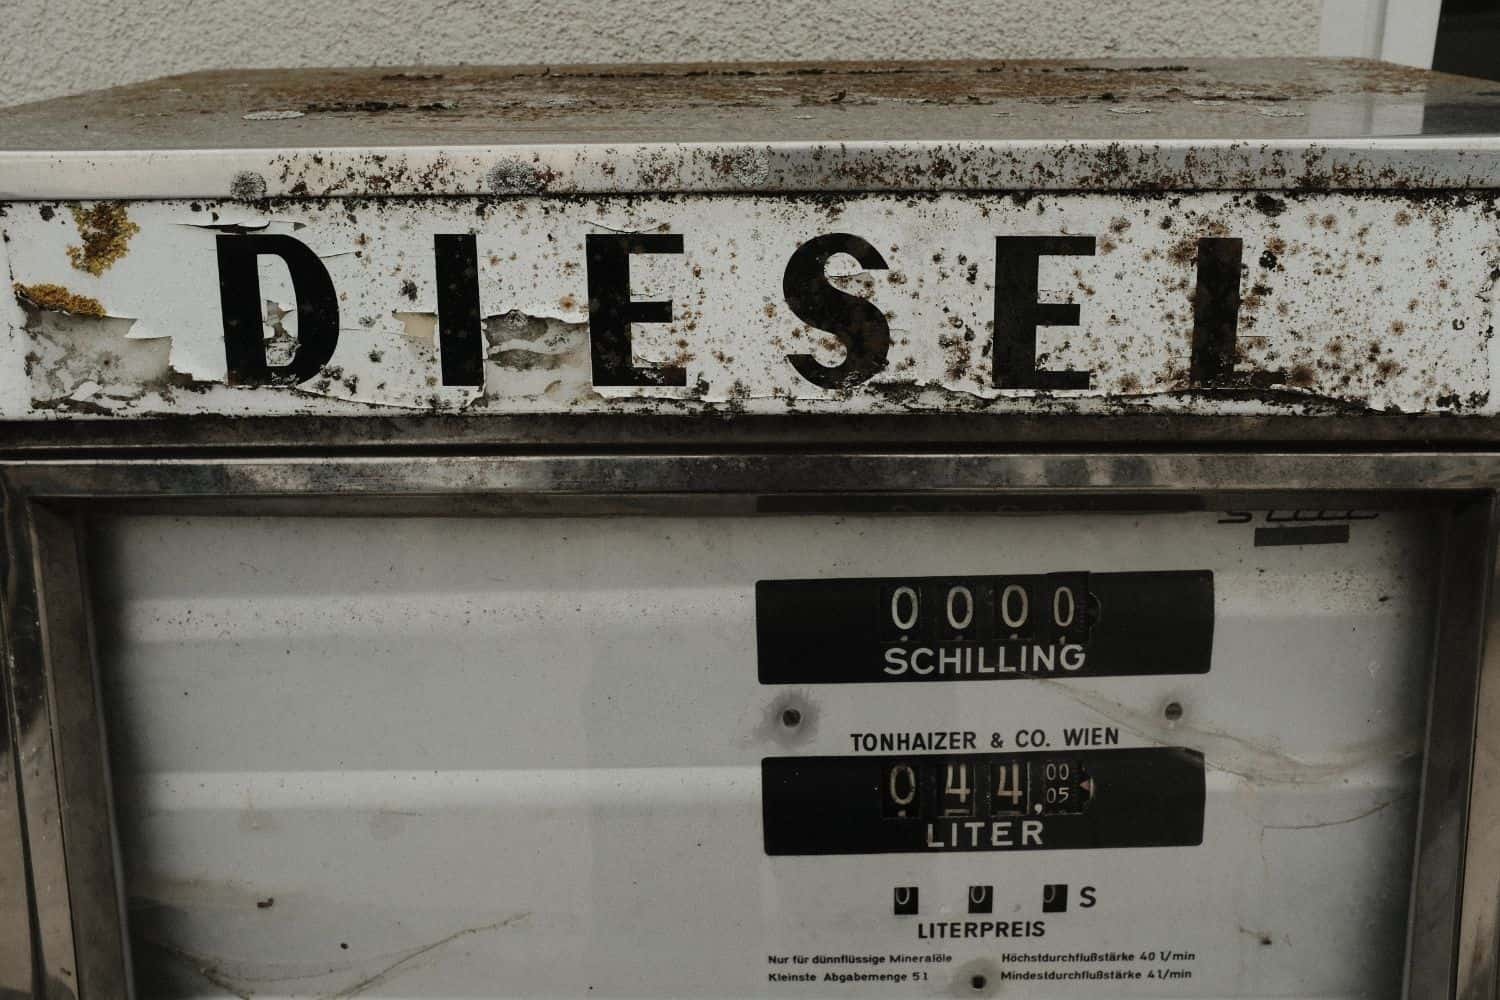 oday's Top News for 17 March 2022 - Thousands of litres of diesel lost after theft